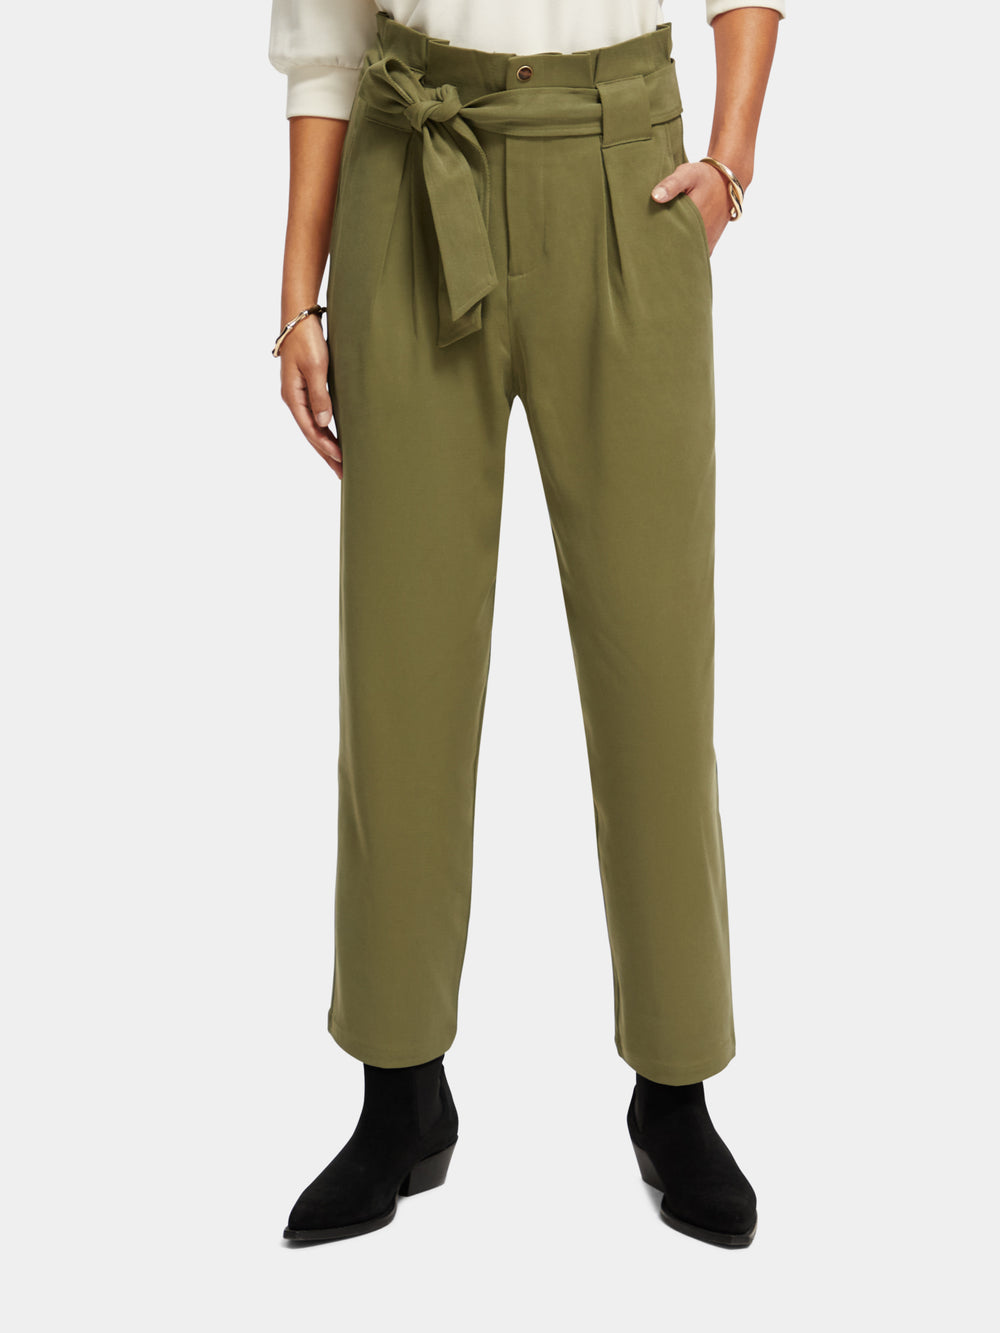 Tapered Paperbag Pants by Scotch & Soda for $31